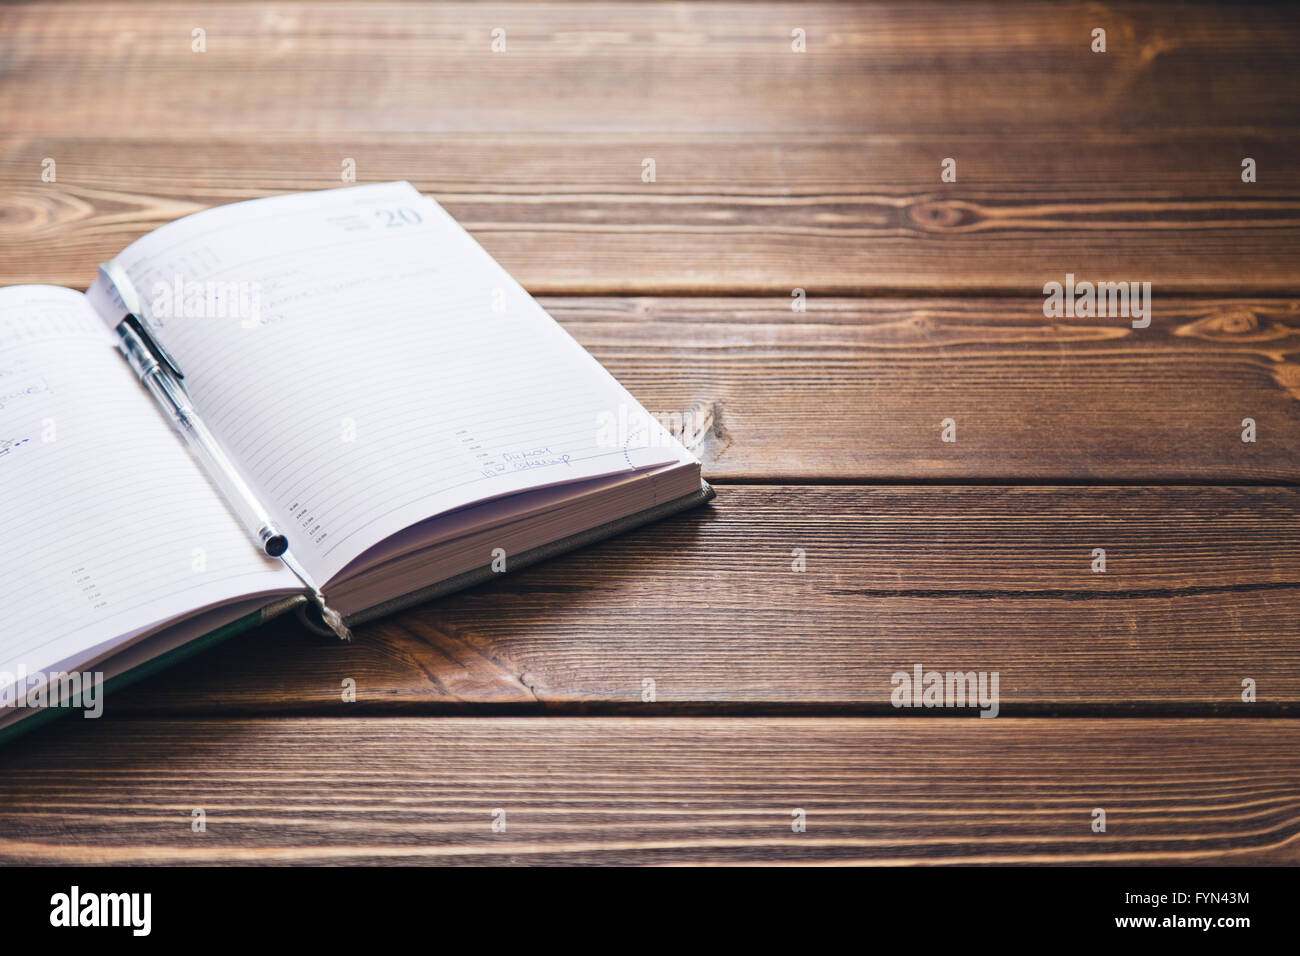 Diary book on the brown wooden desk Stock Photo